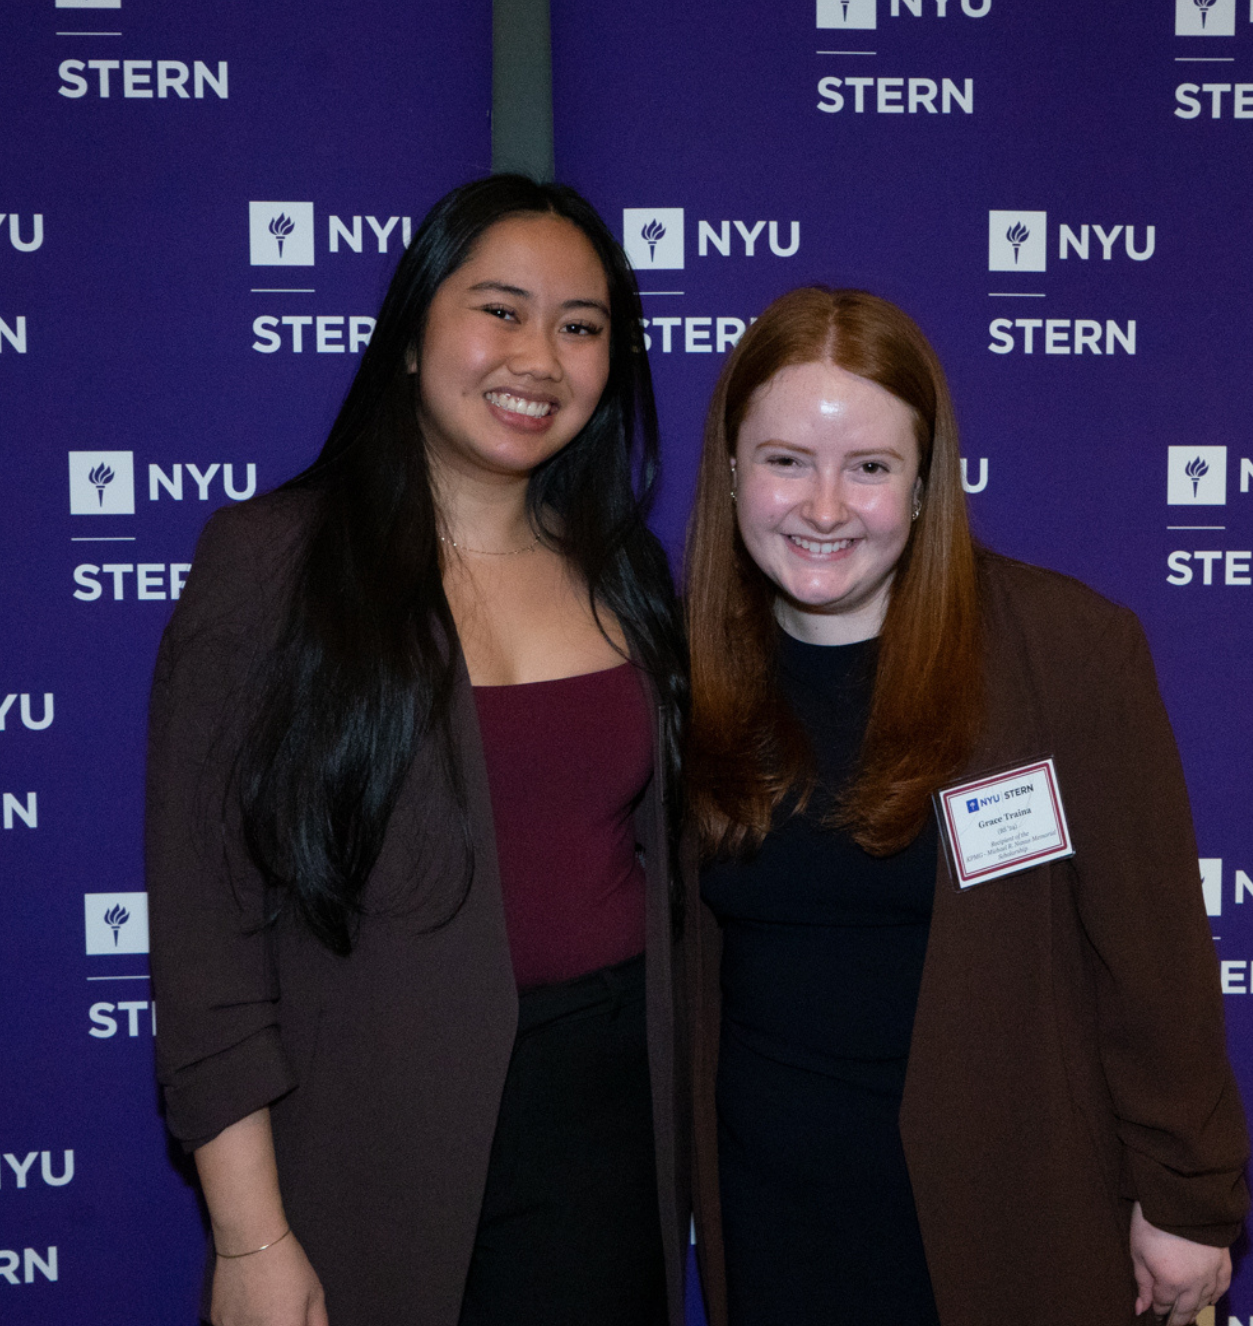 Members of the Stern community gather at the 2024 NYU Stern Scholarship Receptio